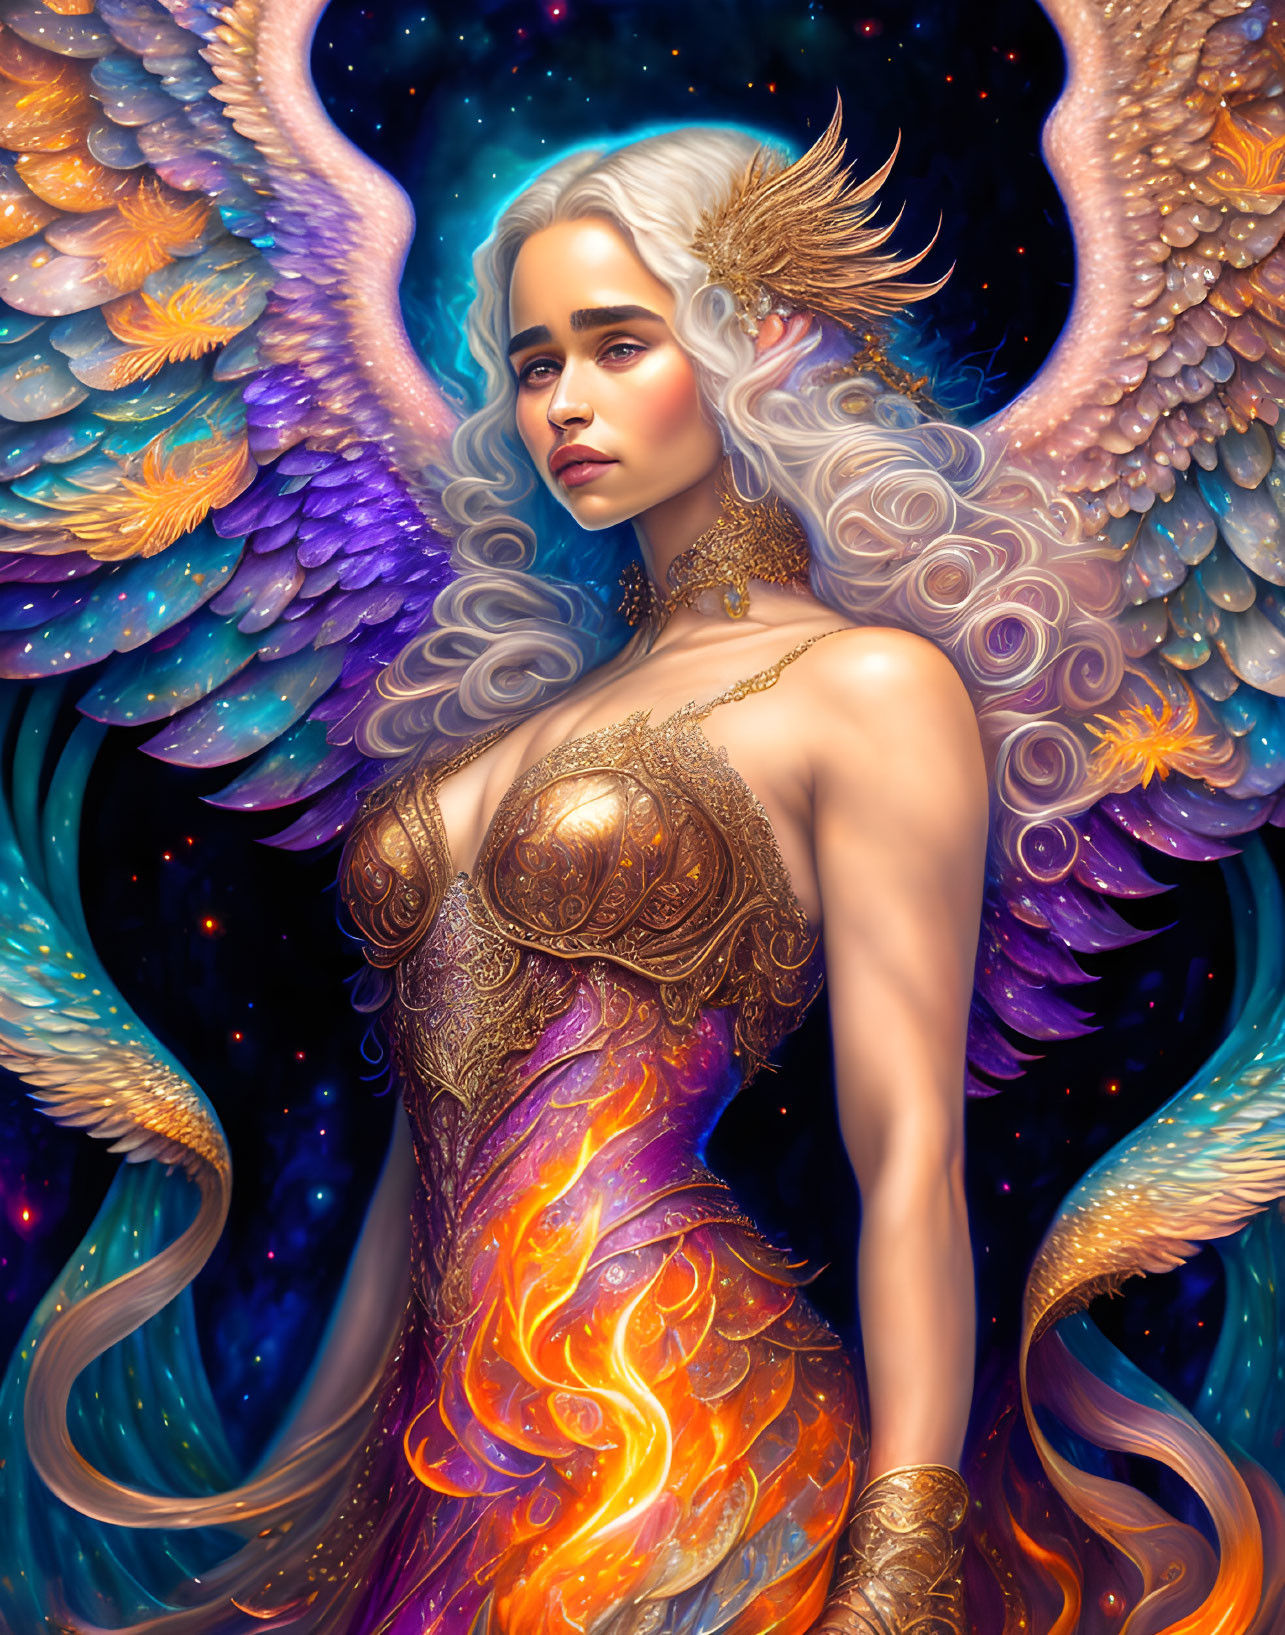 Fantasy illustration of woman in golden armor with silver hair and fiery wings on starry backdrop